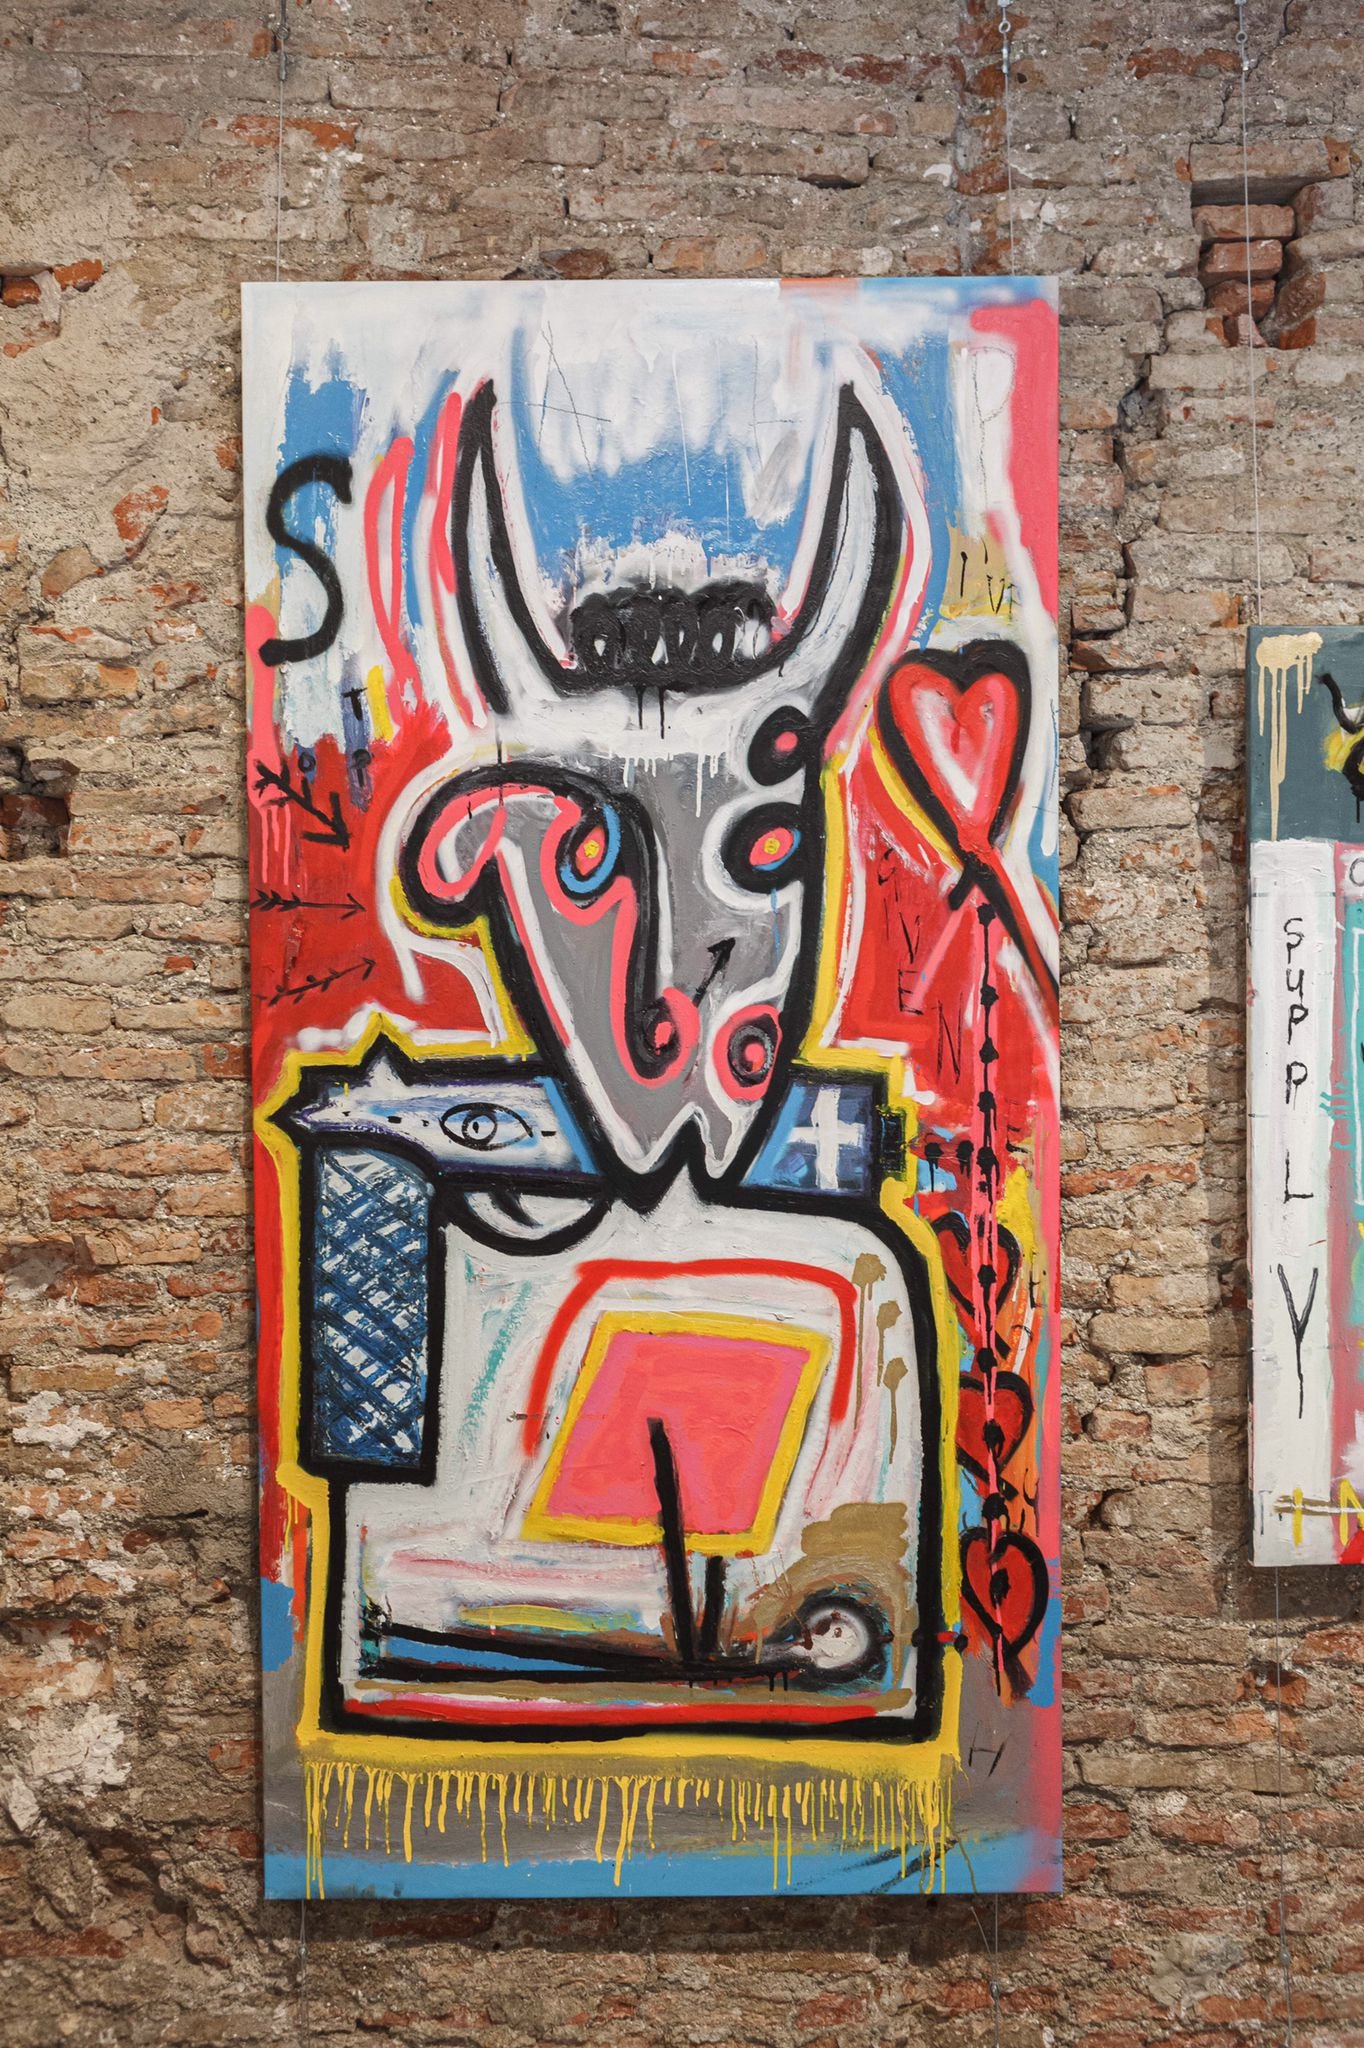 A painting about bullfighting by PIGSY where he has painted a gun in the mouth of the bull